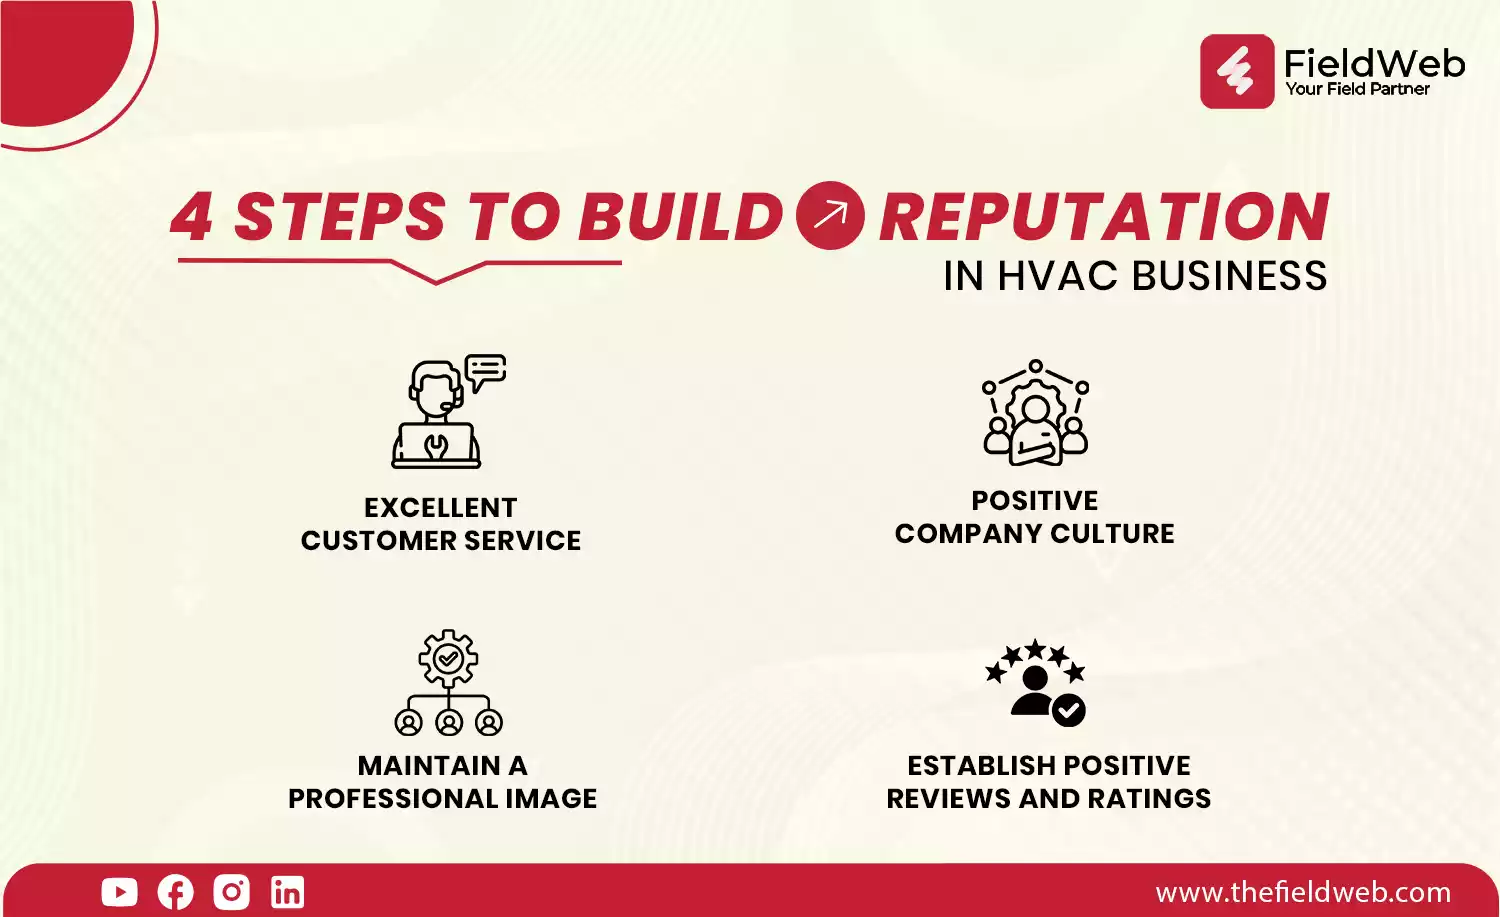 image is describing the 4 steps to build a strong relationship in the HVAC business